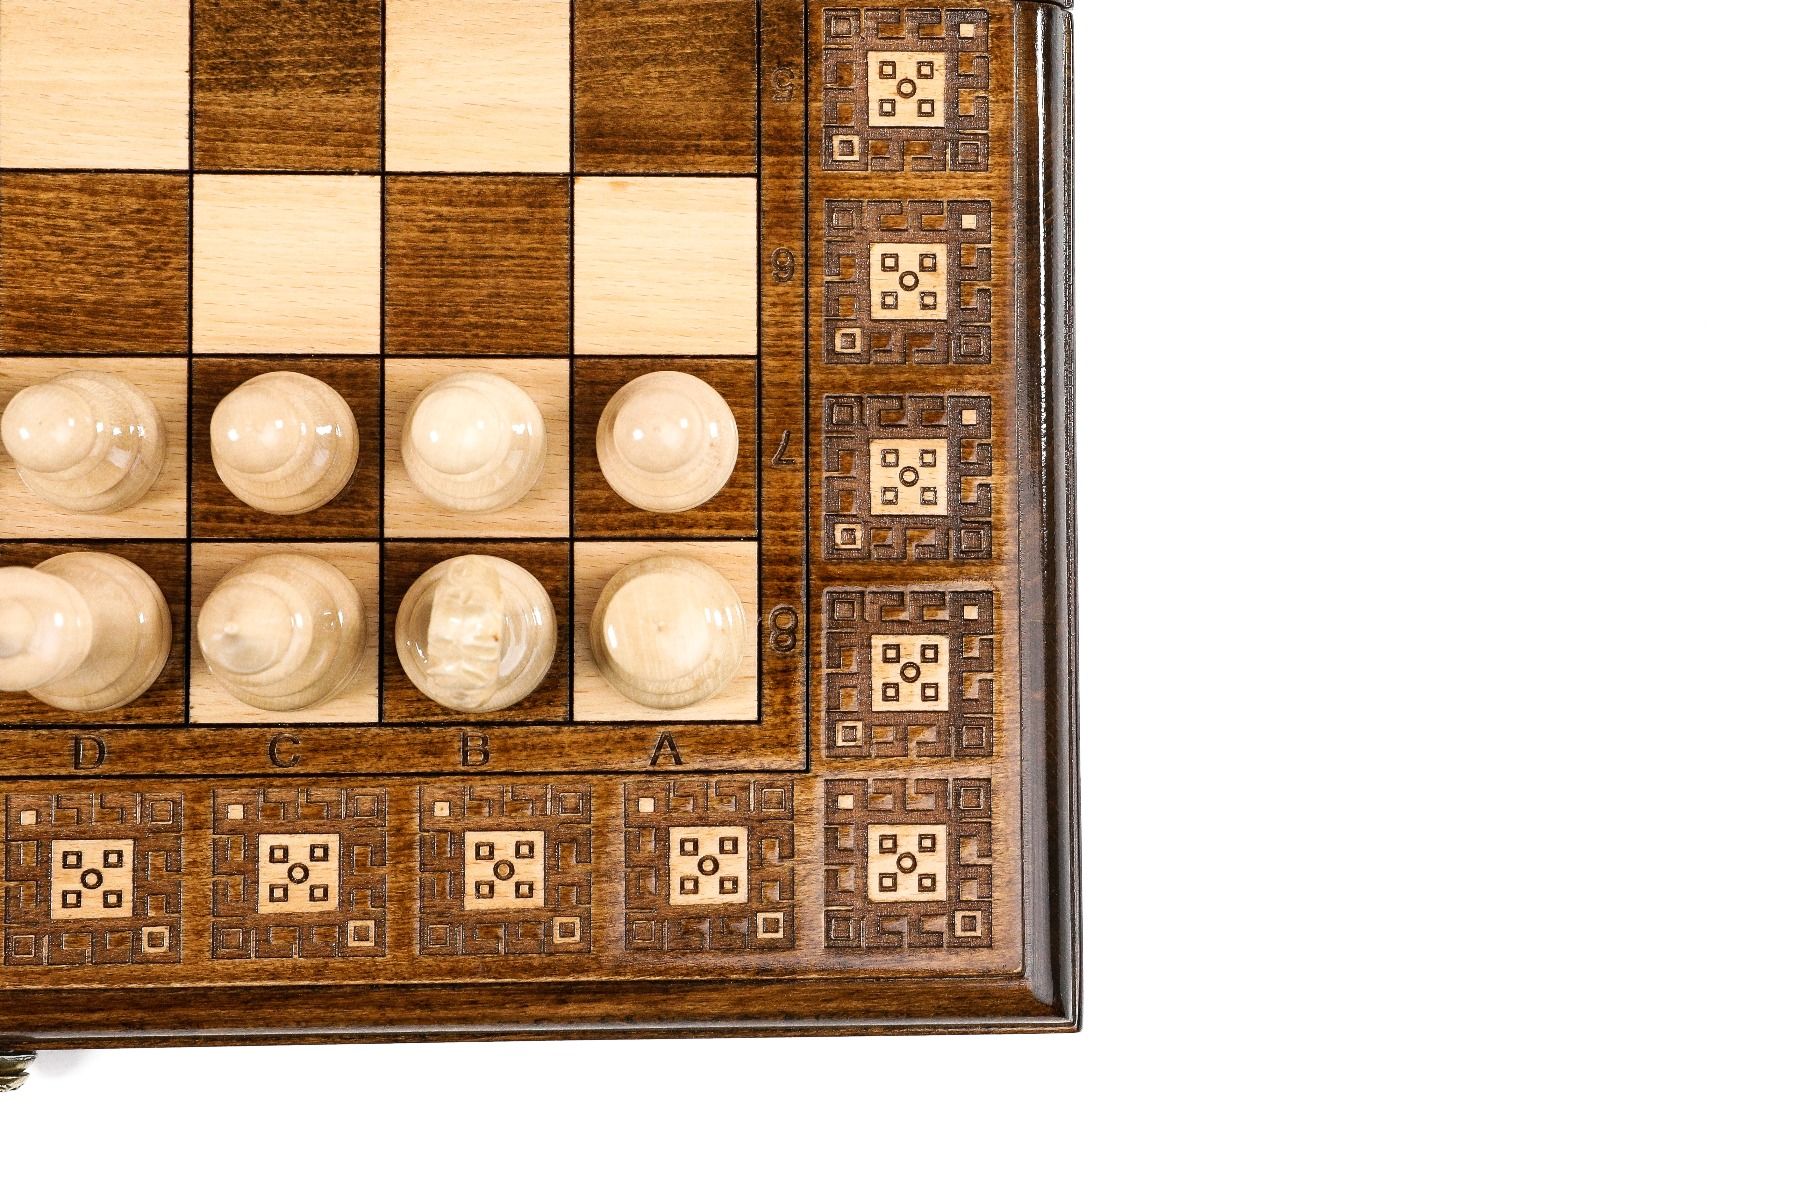 Command the board in style with a handcrafted chess set that redefines gaming elegance, featuring meticulously applied carpet designs.